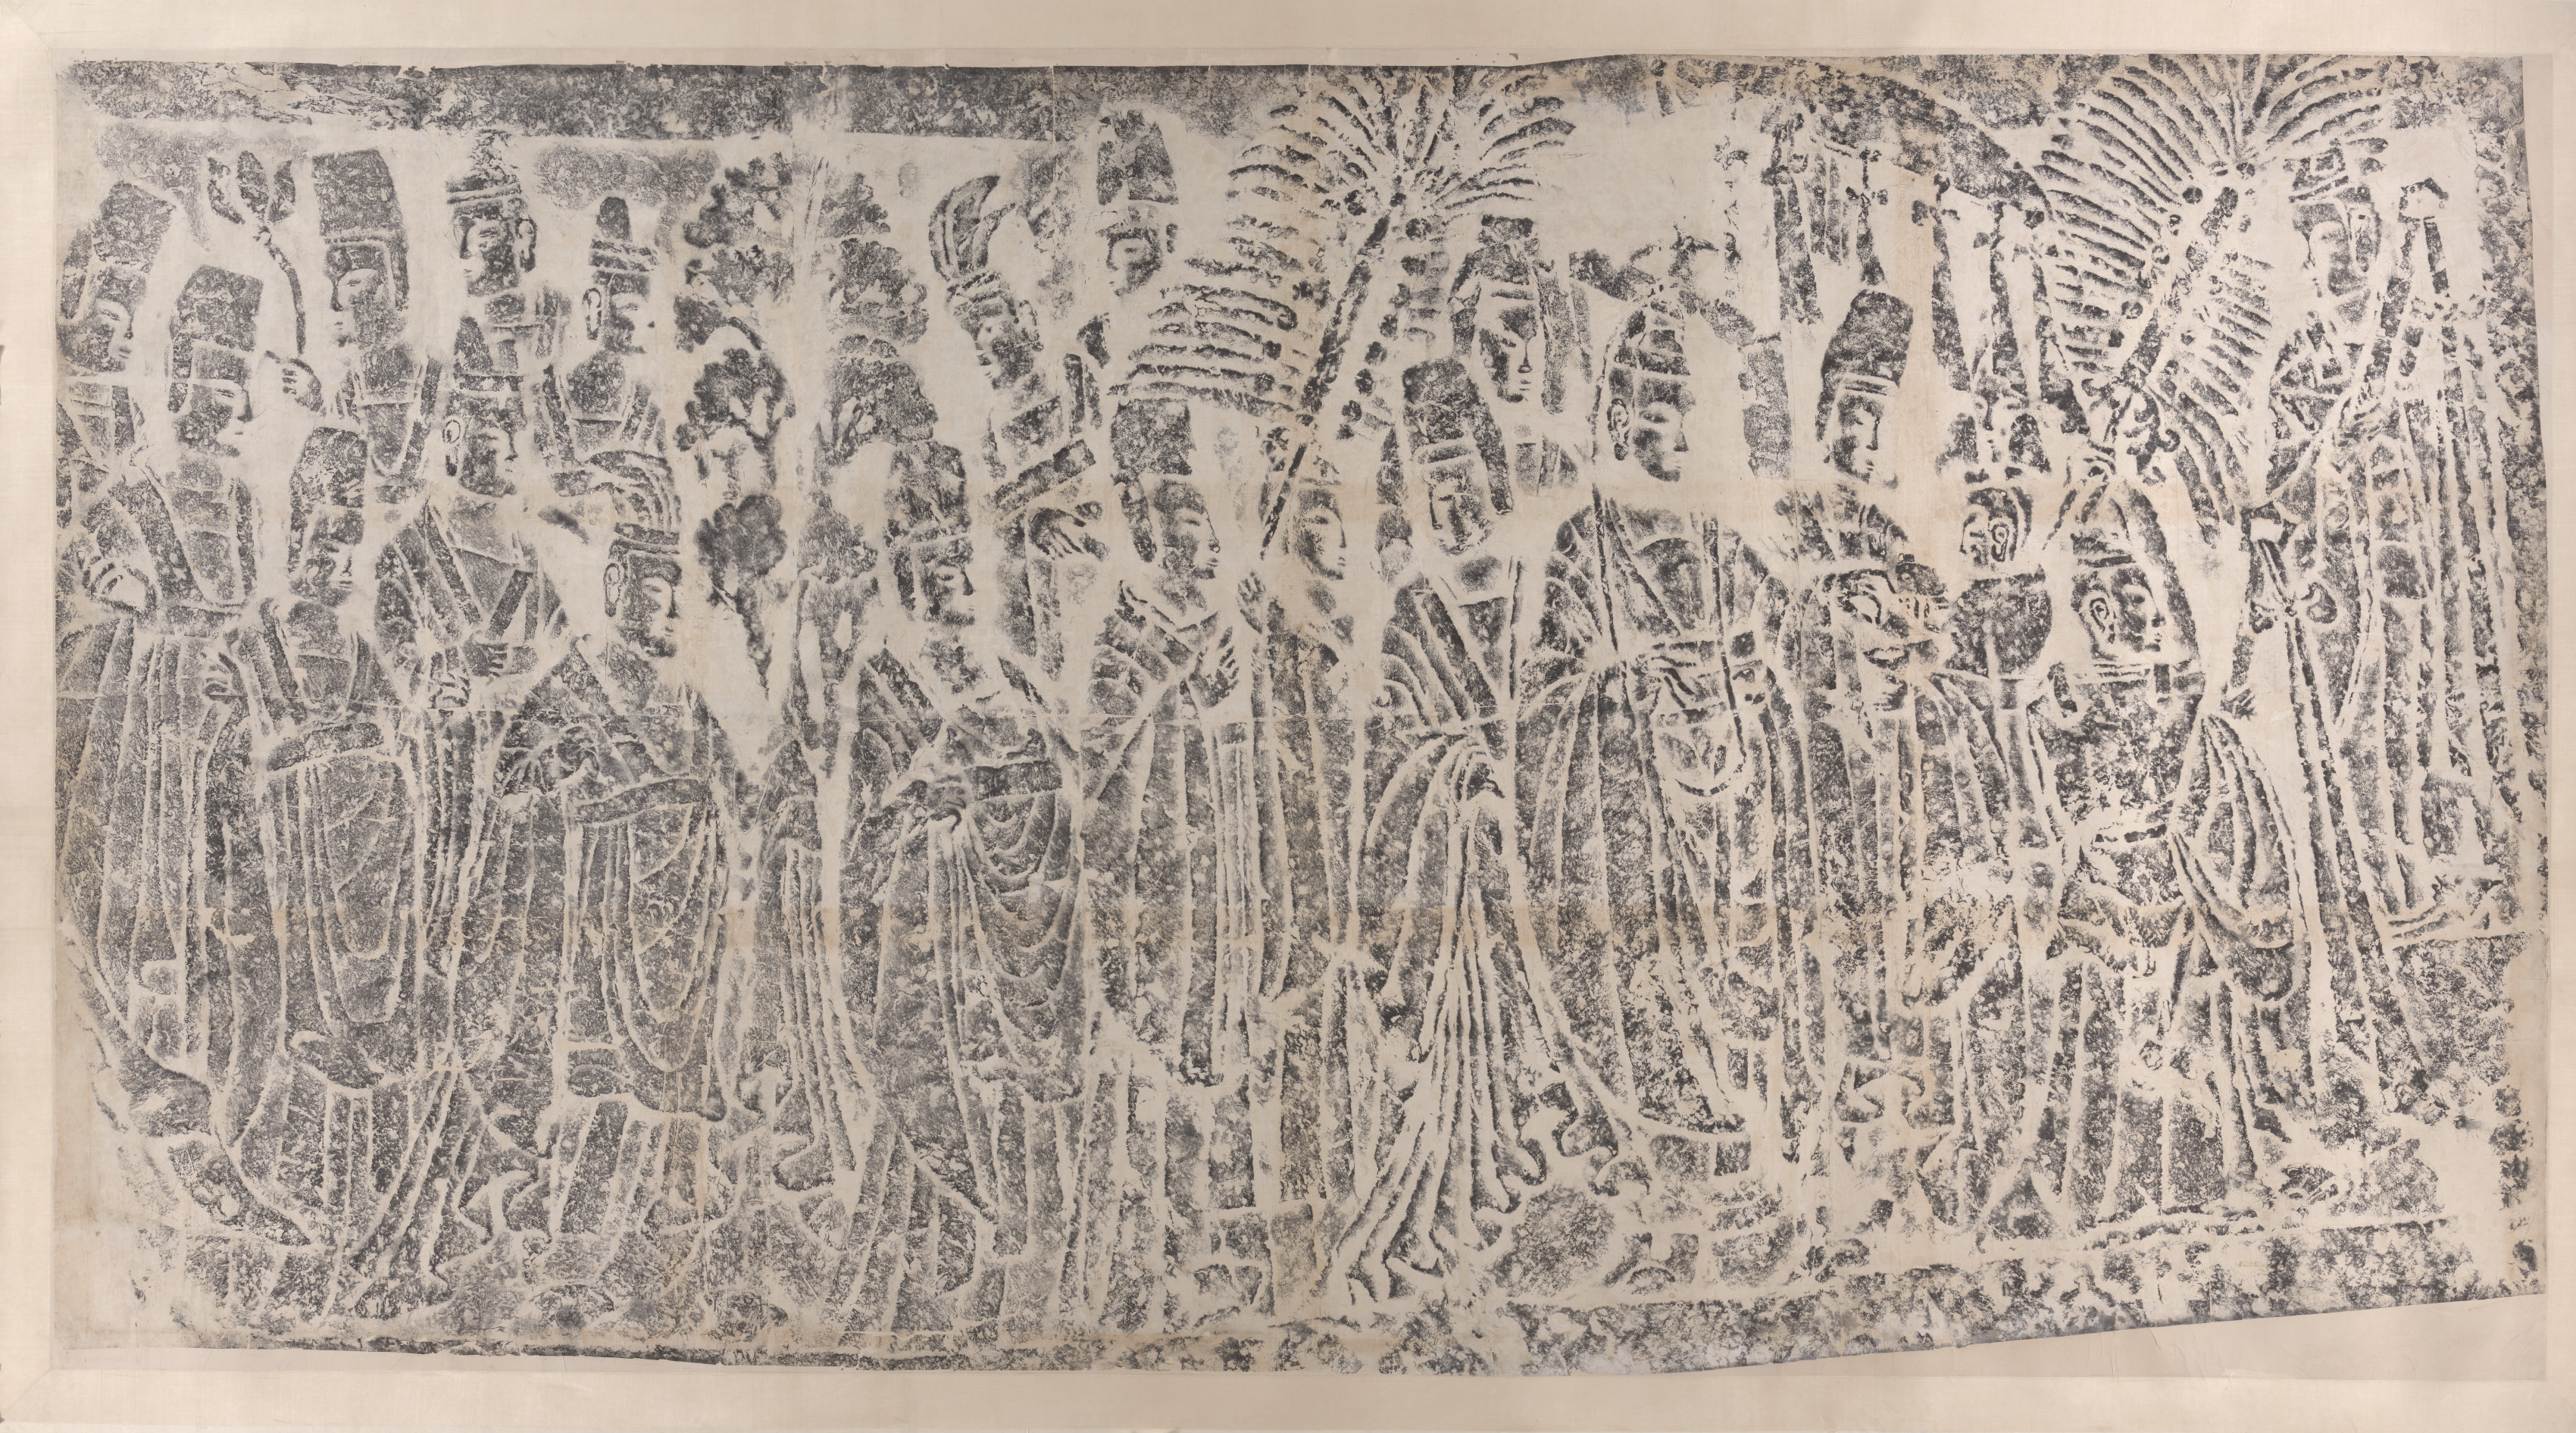 Rubbing of Imperial Procession with Emperor, taken from Northern Wei dynasty (386–534) Central Binyang Cave, Longmen, Henan Province